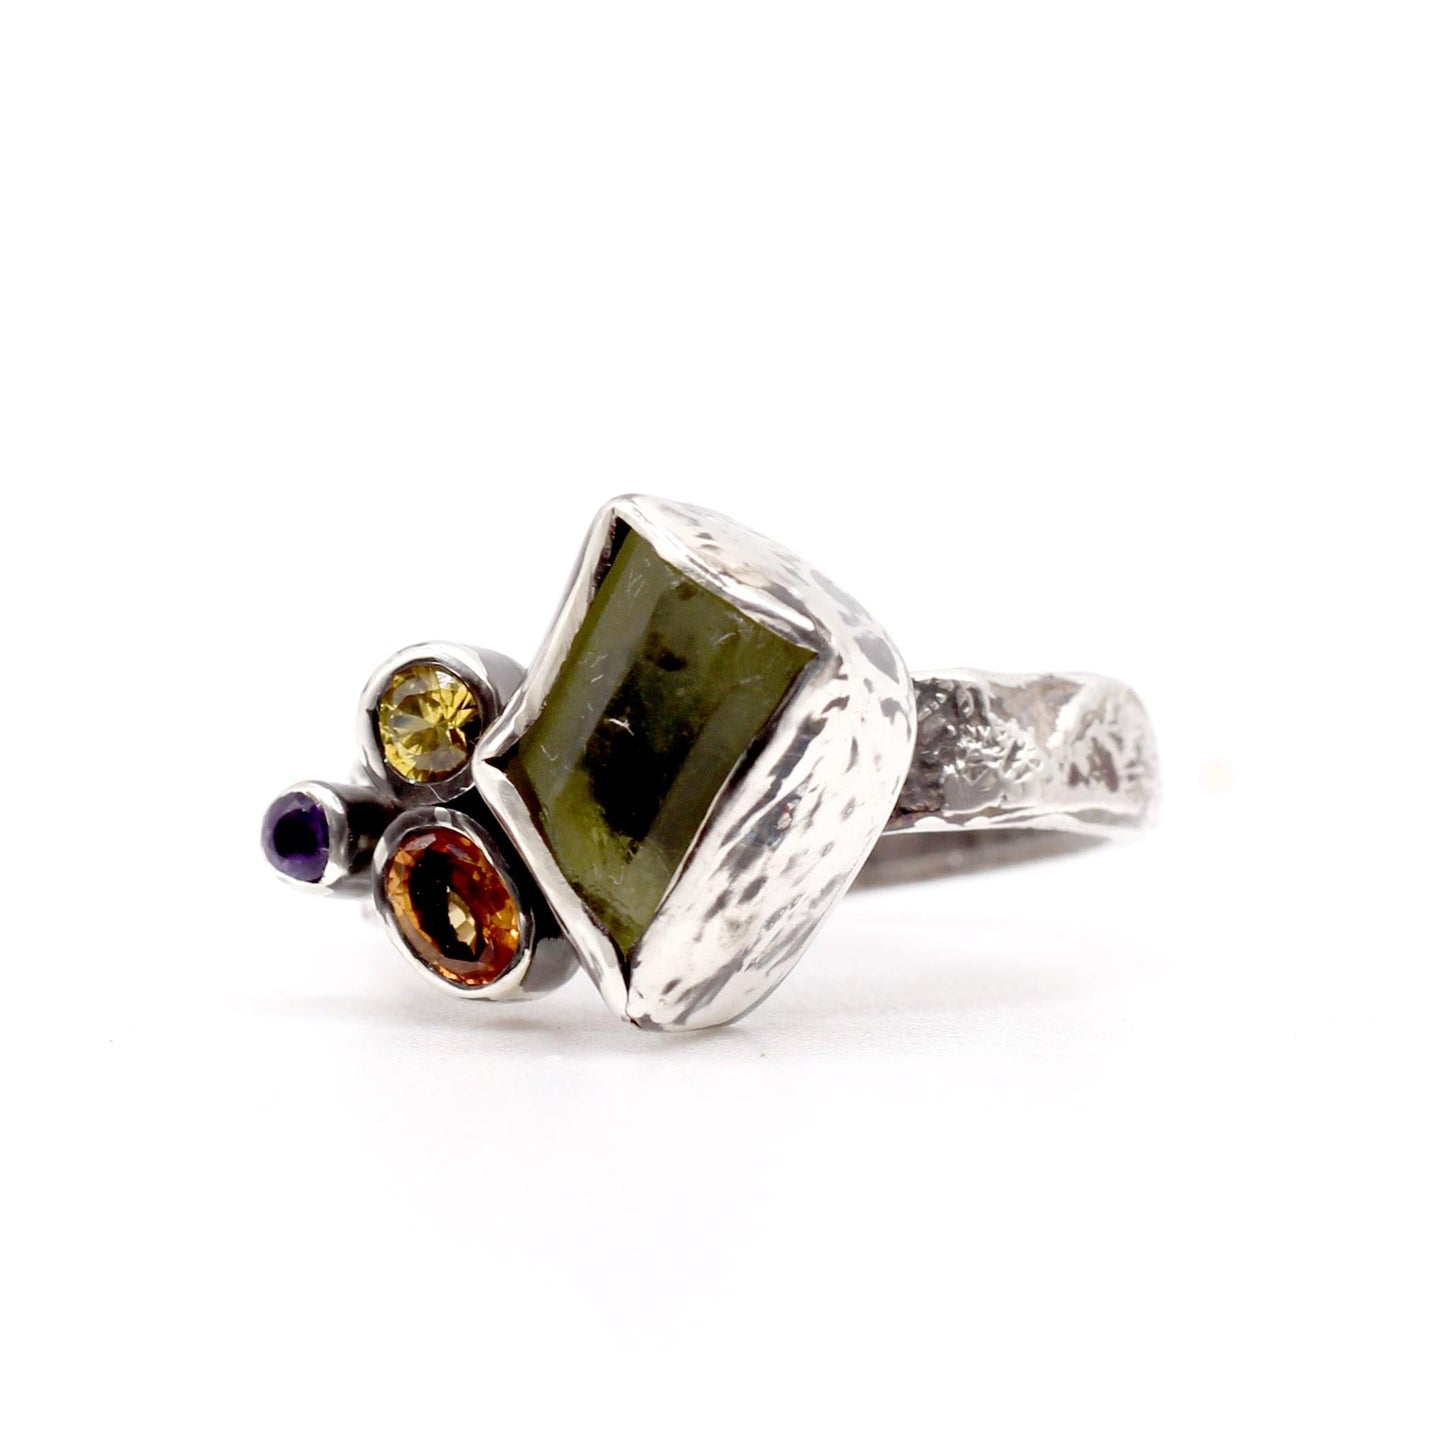 Candice Ring - Citrine, Sapphire and Amethyst Cluster with Textured Silver Band